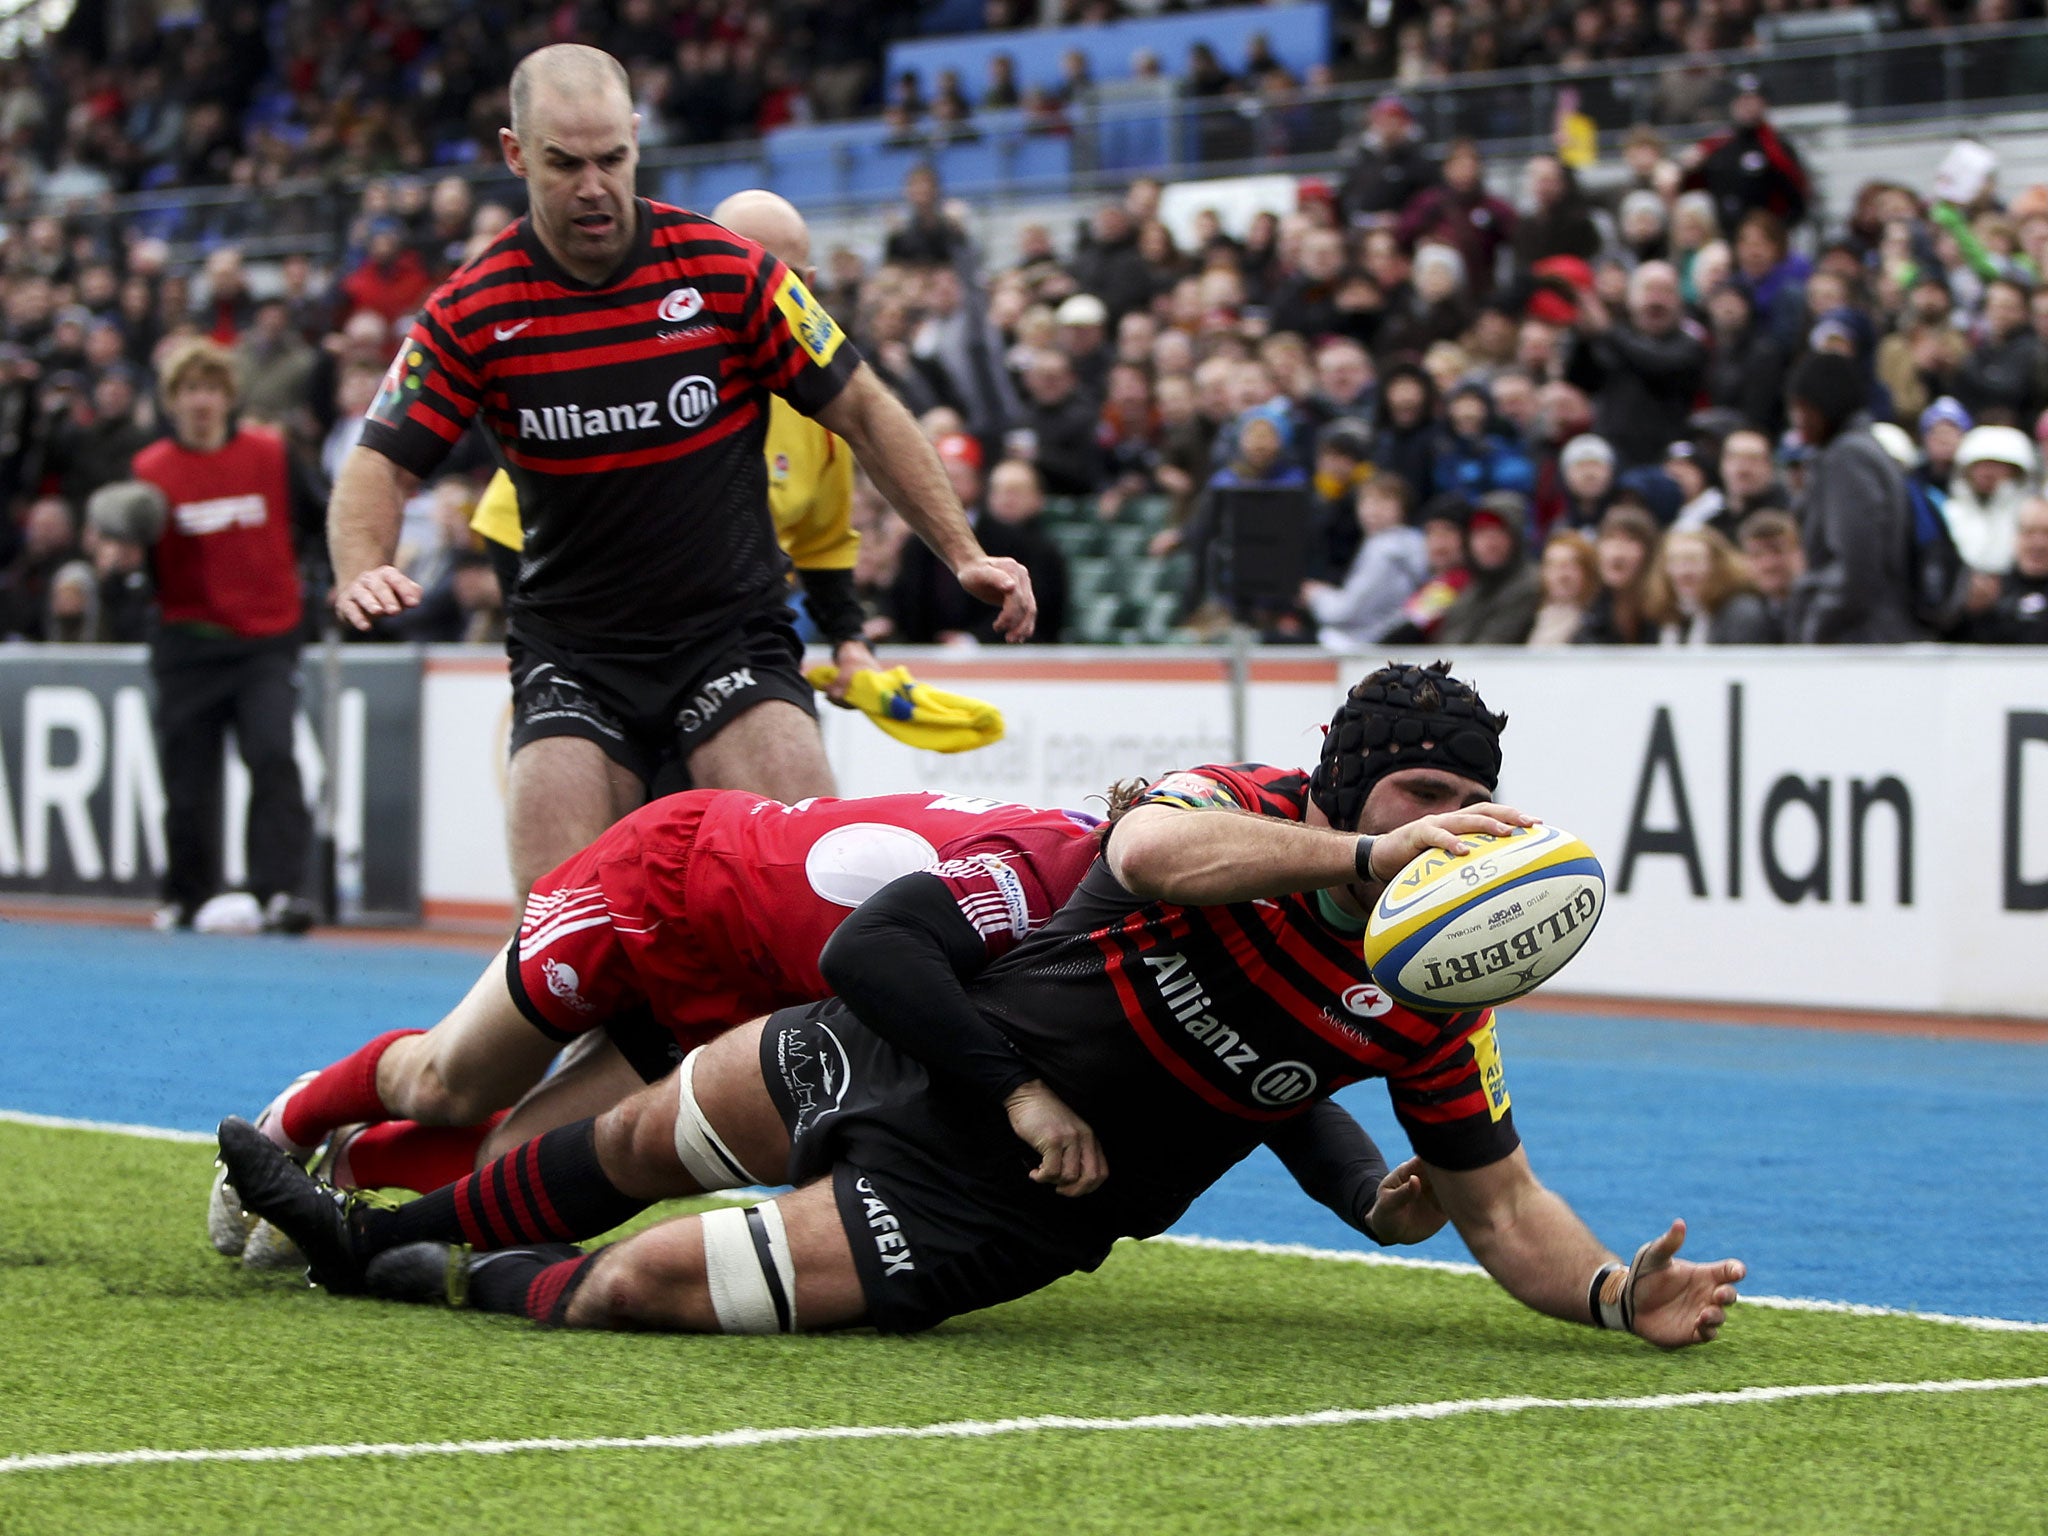 Will Fraser of Saracens scores a try during the Aviva Premiership match between Saracens and London Welsh